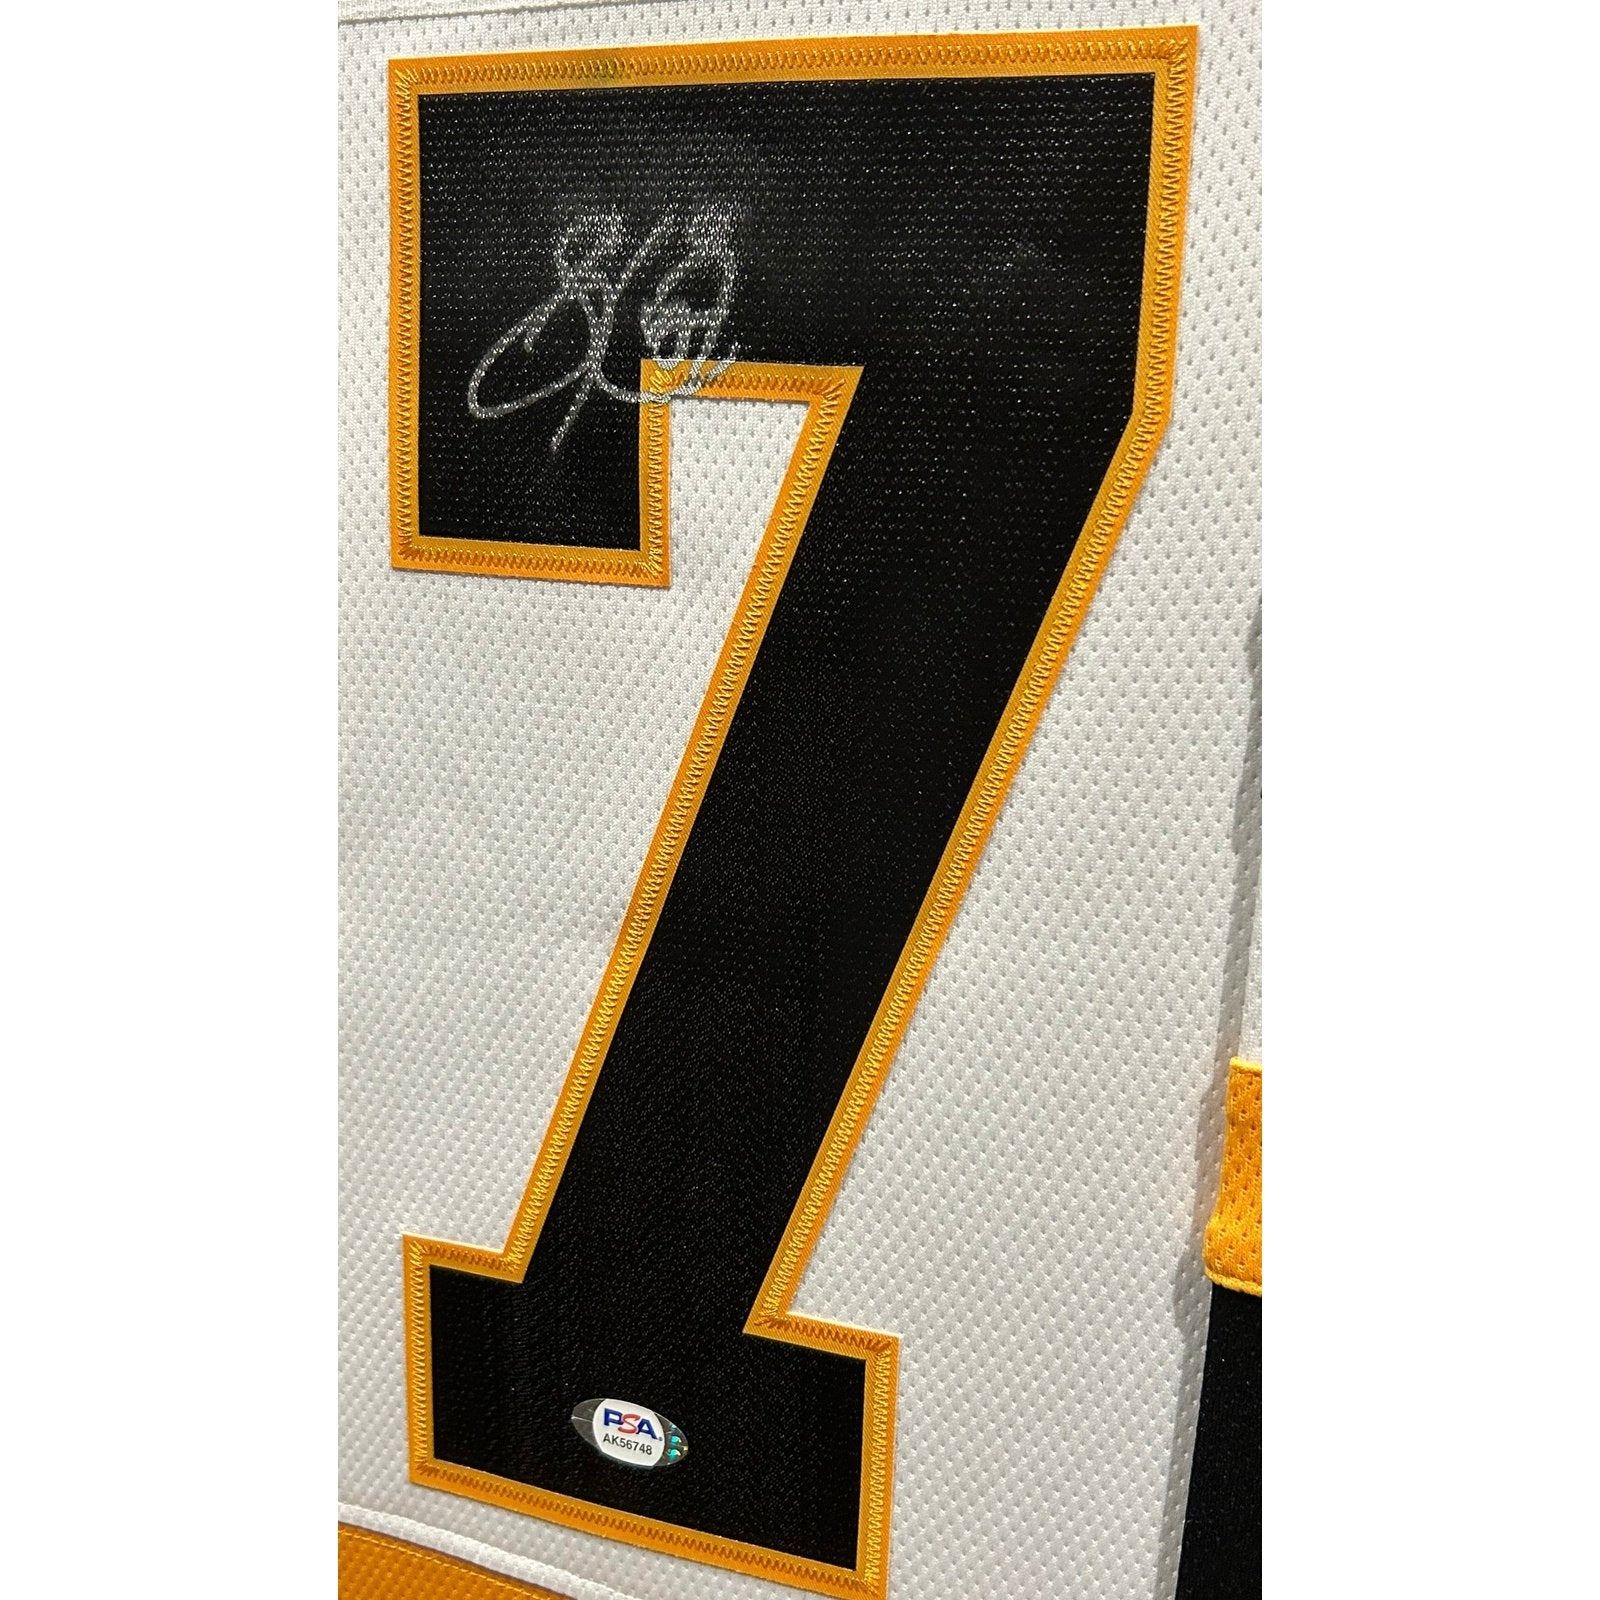 SIDNEY CROSBY Jersey Pittsburgh Penguins Hand Signed Autographed